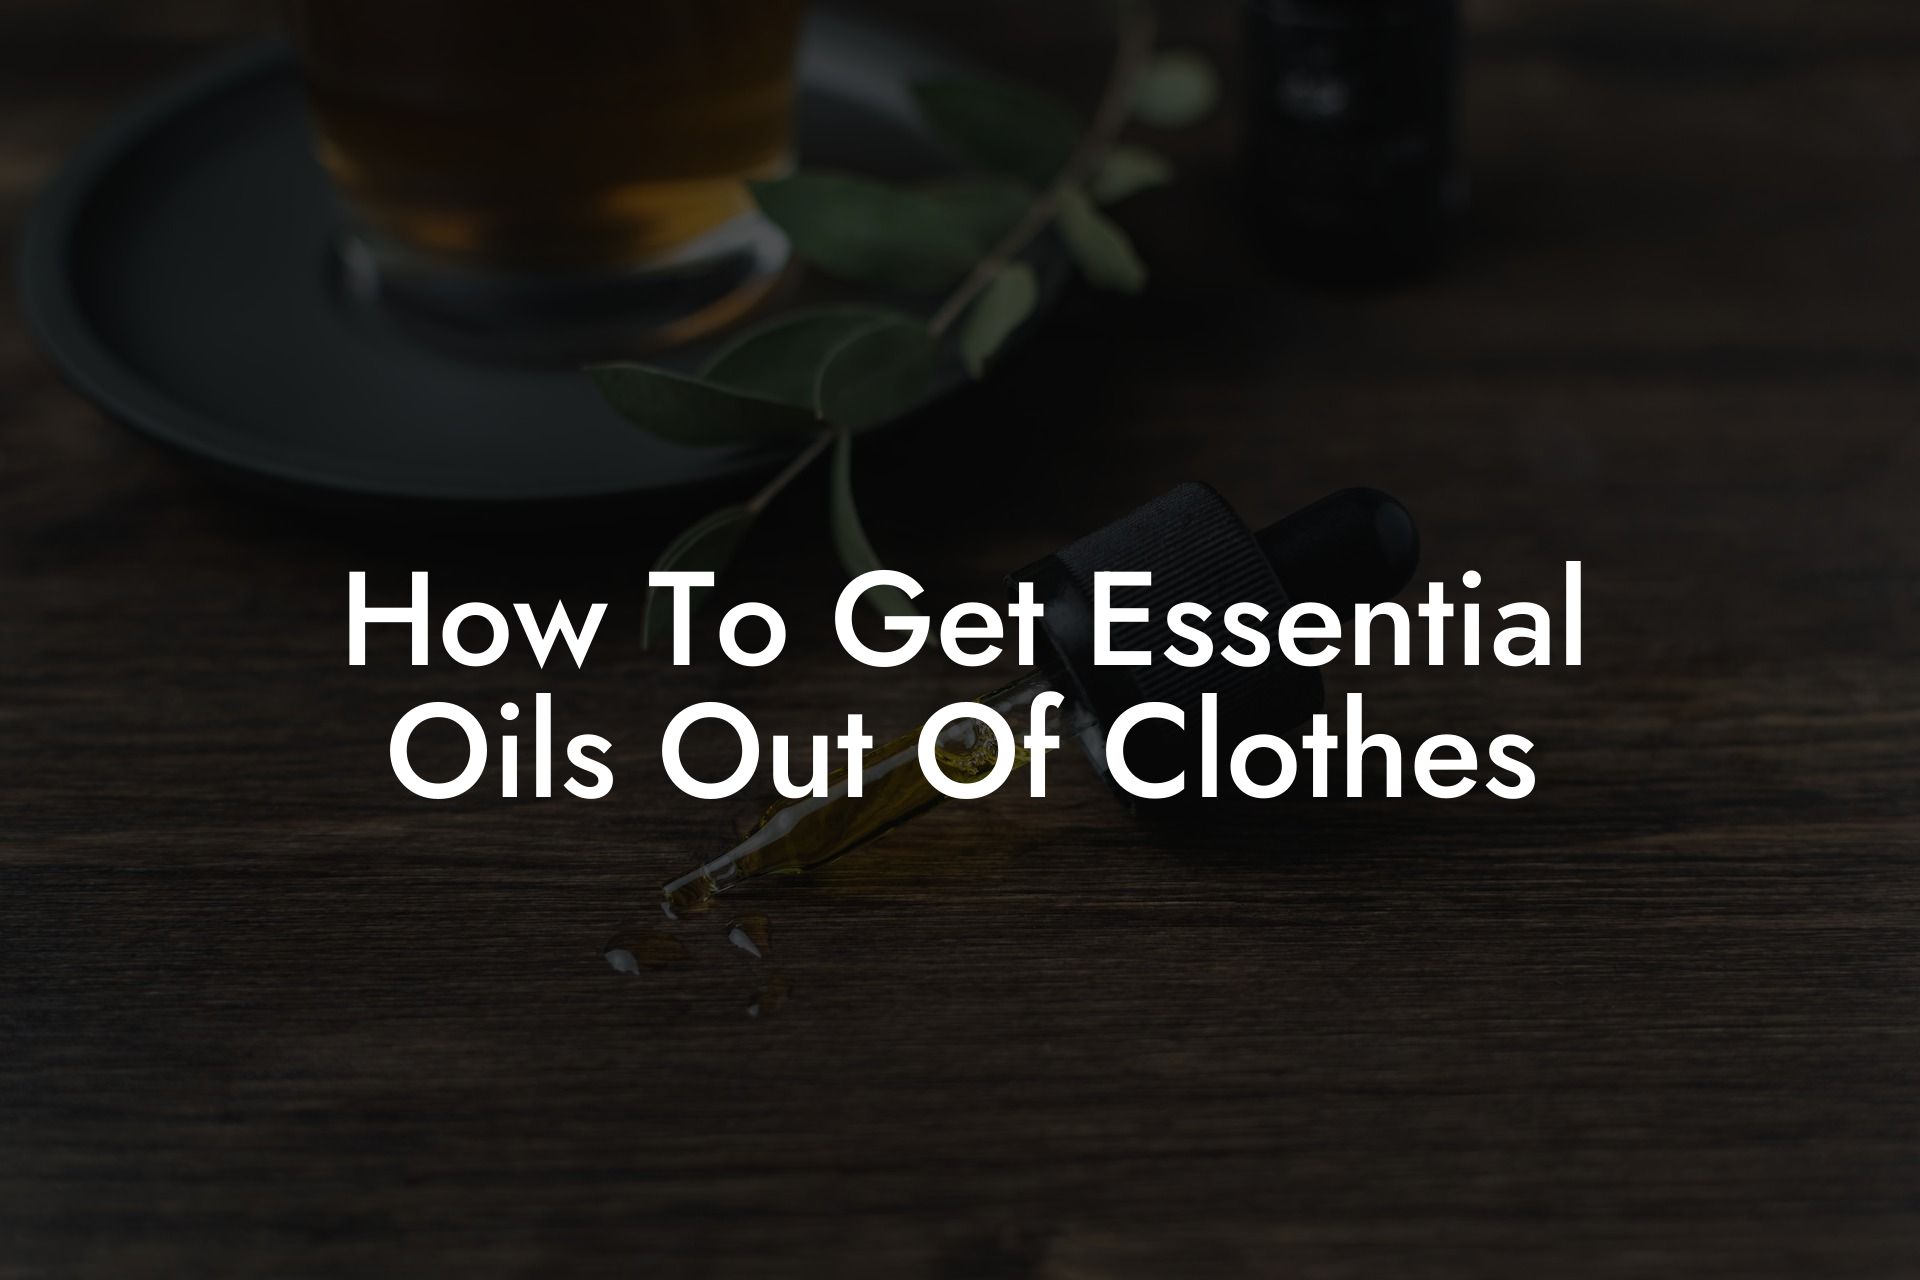 How To Get Essential Oils Out Of Clothes